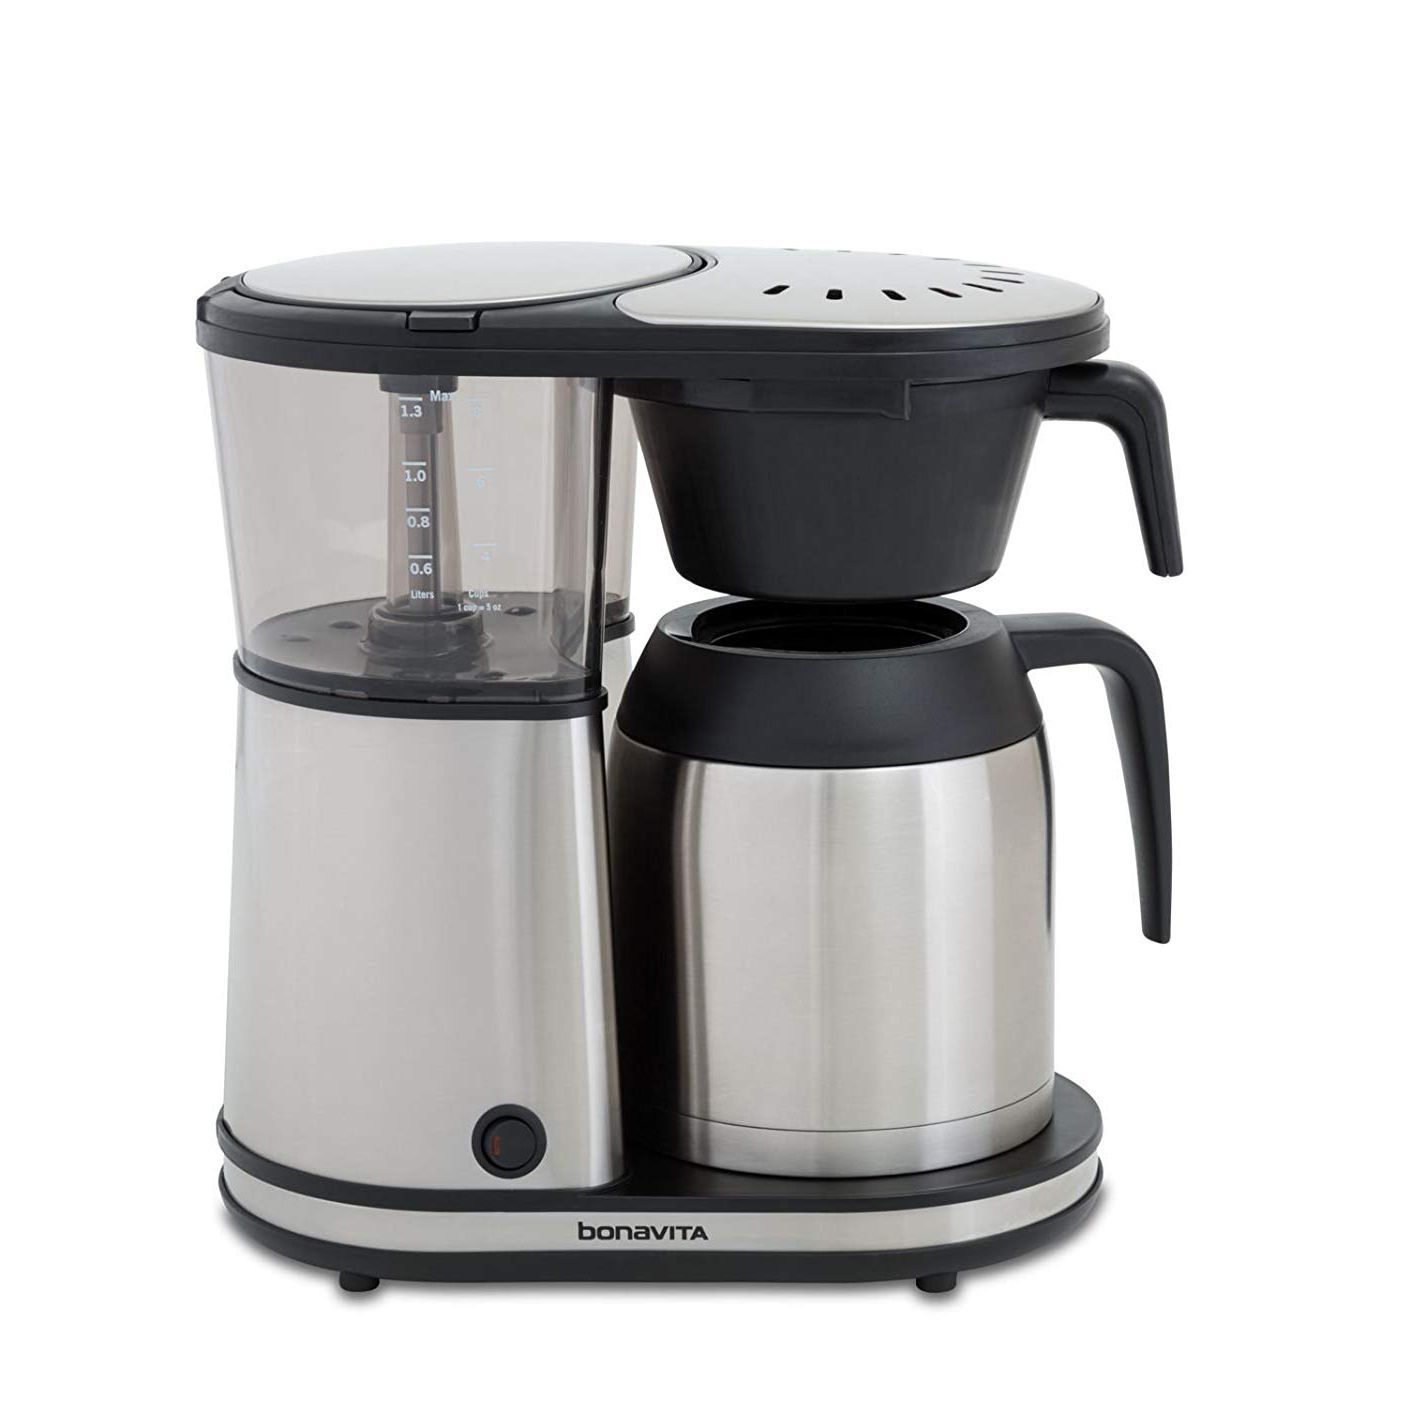 Connoisseur 8-Cup Coffee Maker